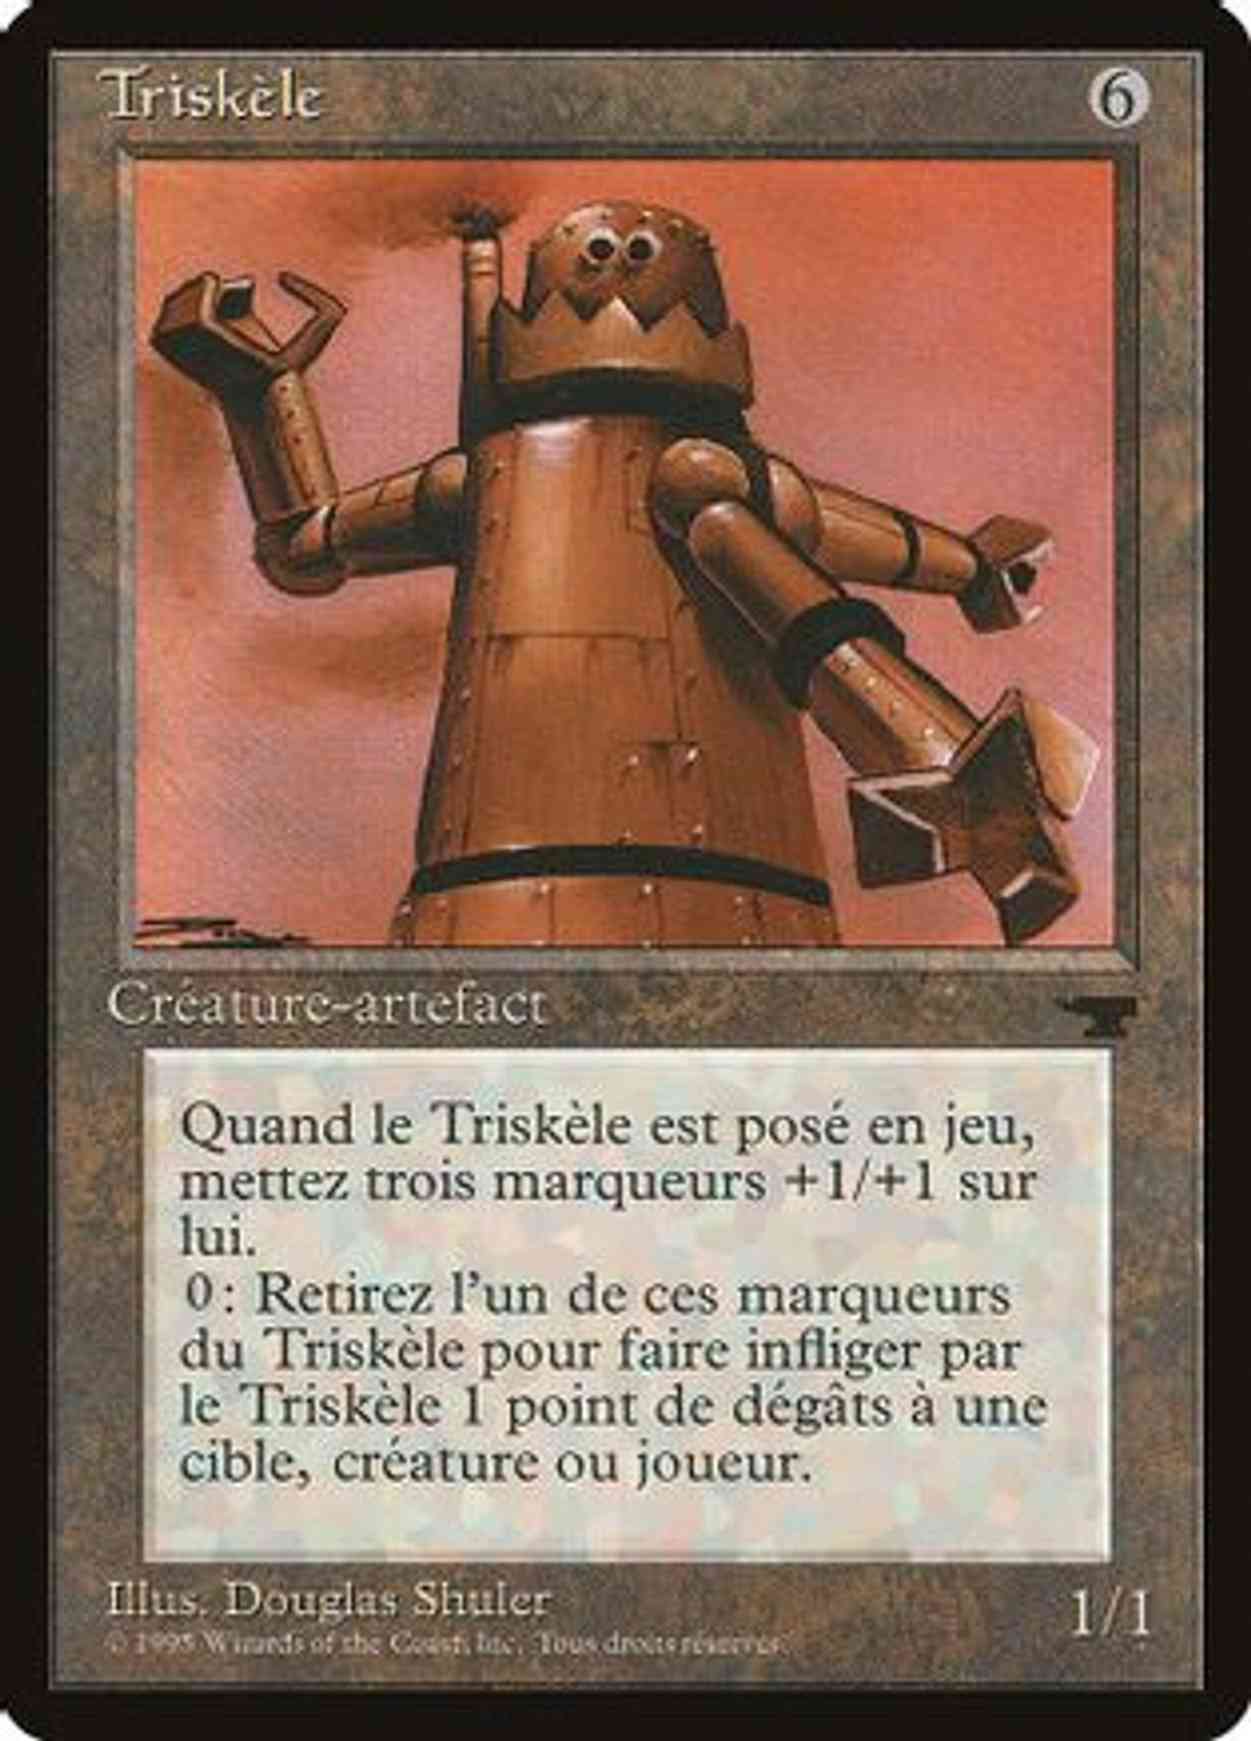 Triskelion (French) - "Triskele" magic card front